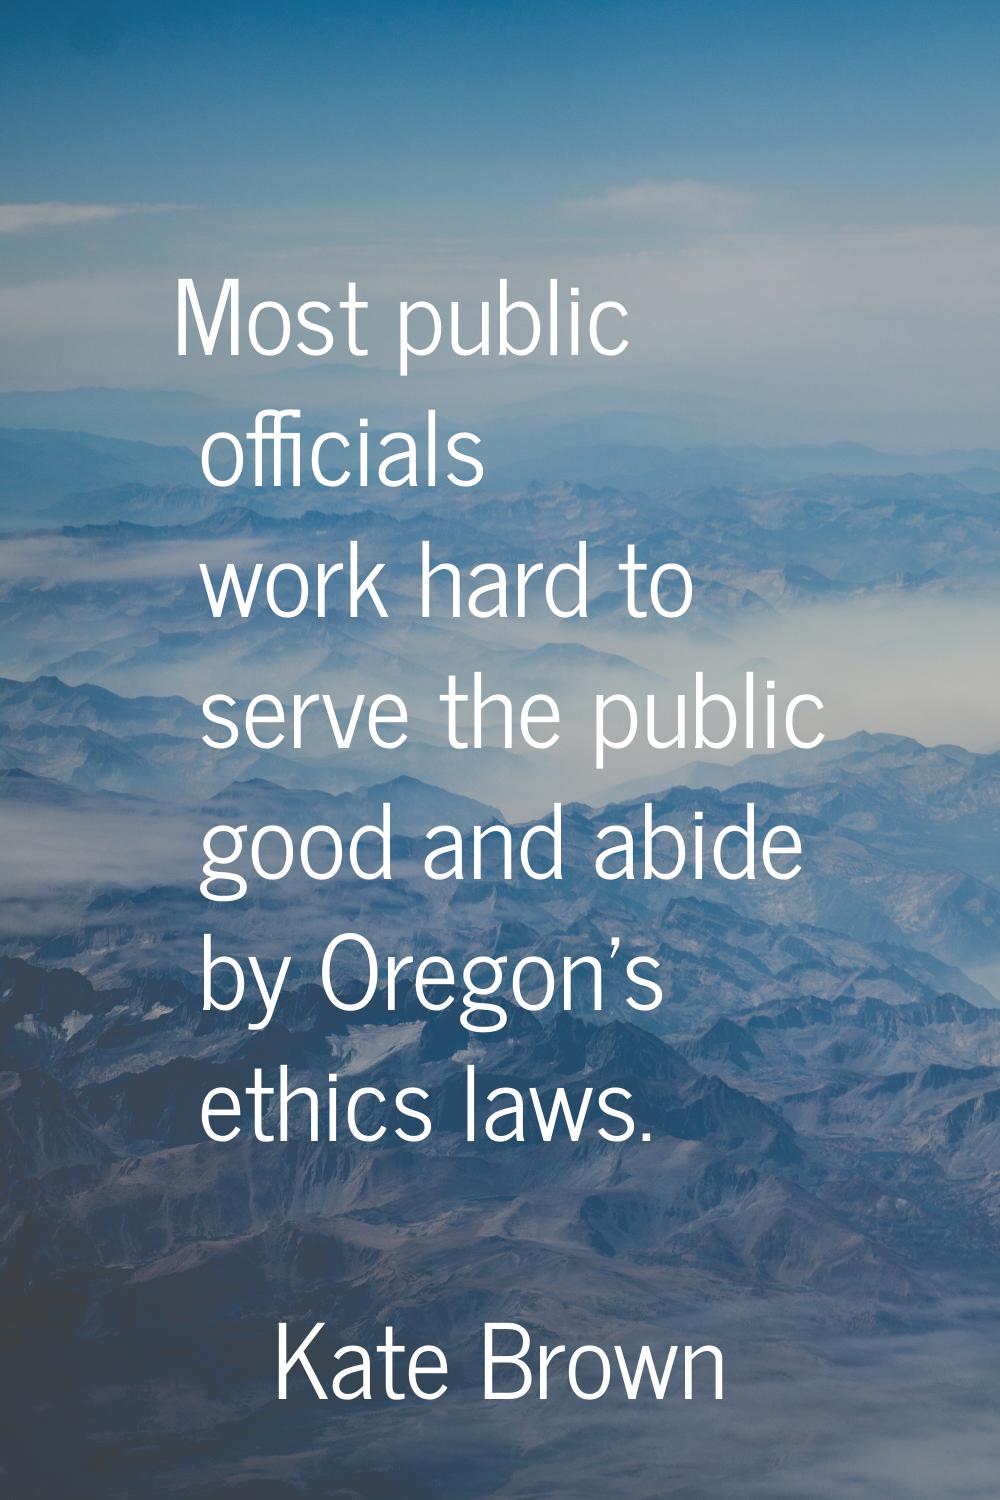 Most public officials work hard to serve the public good and abide by Oregon's ethics laws.